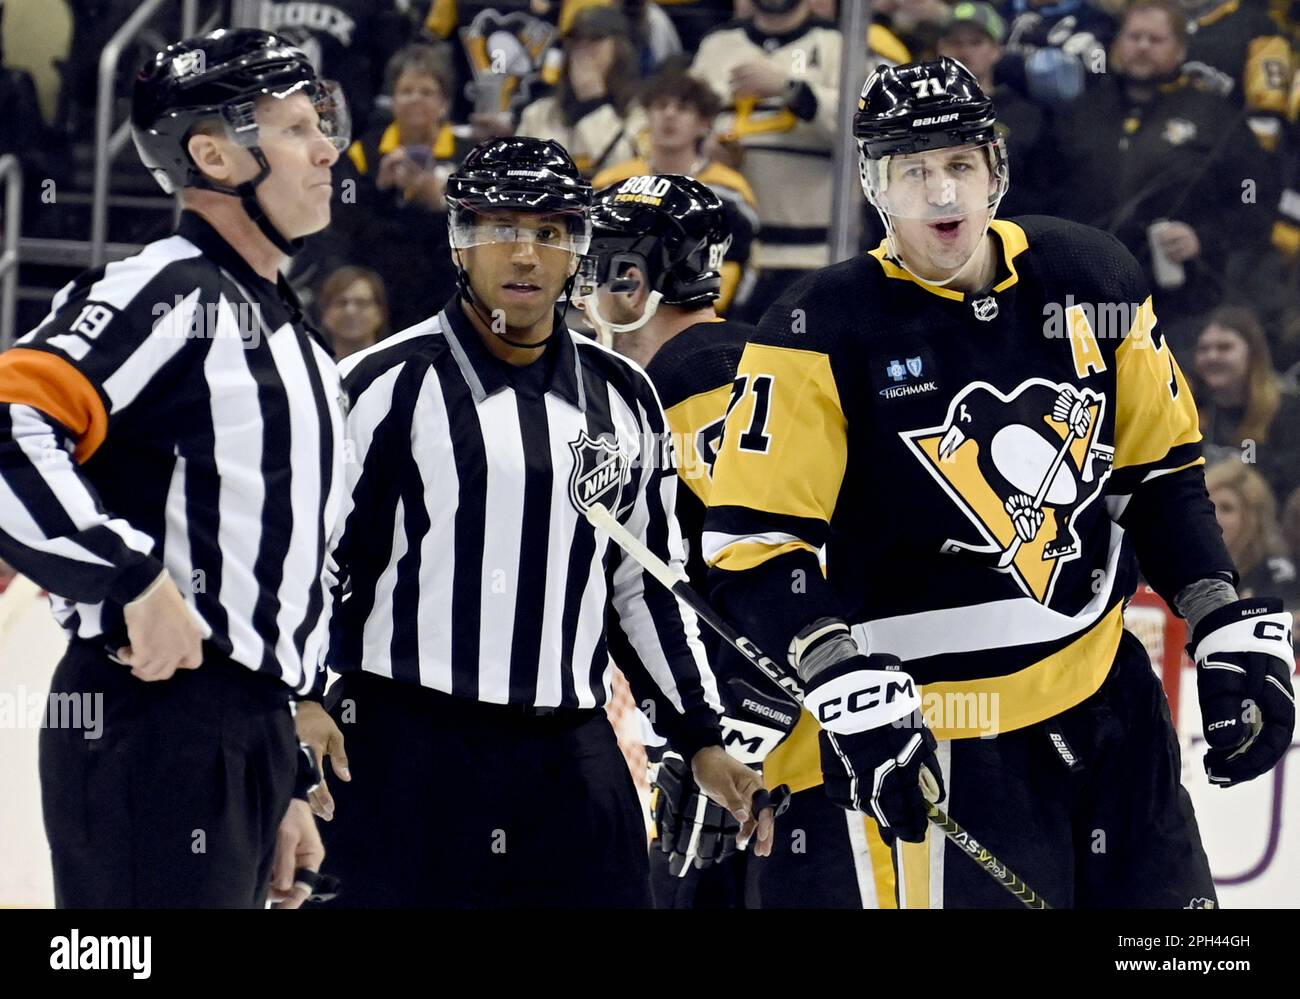 Evgeni Malkin And Brenden Dillon Keep Fighting As Referee Tries To